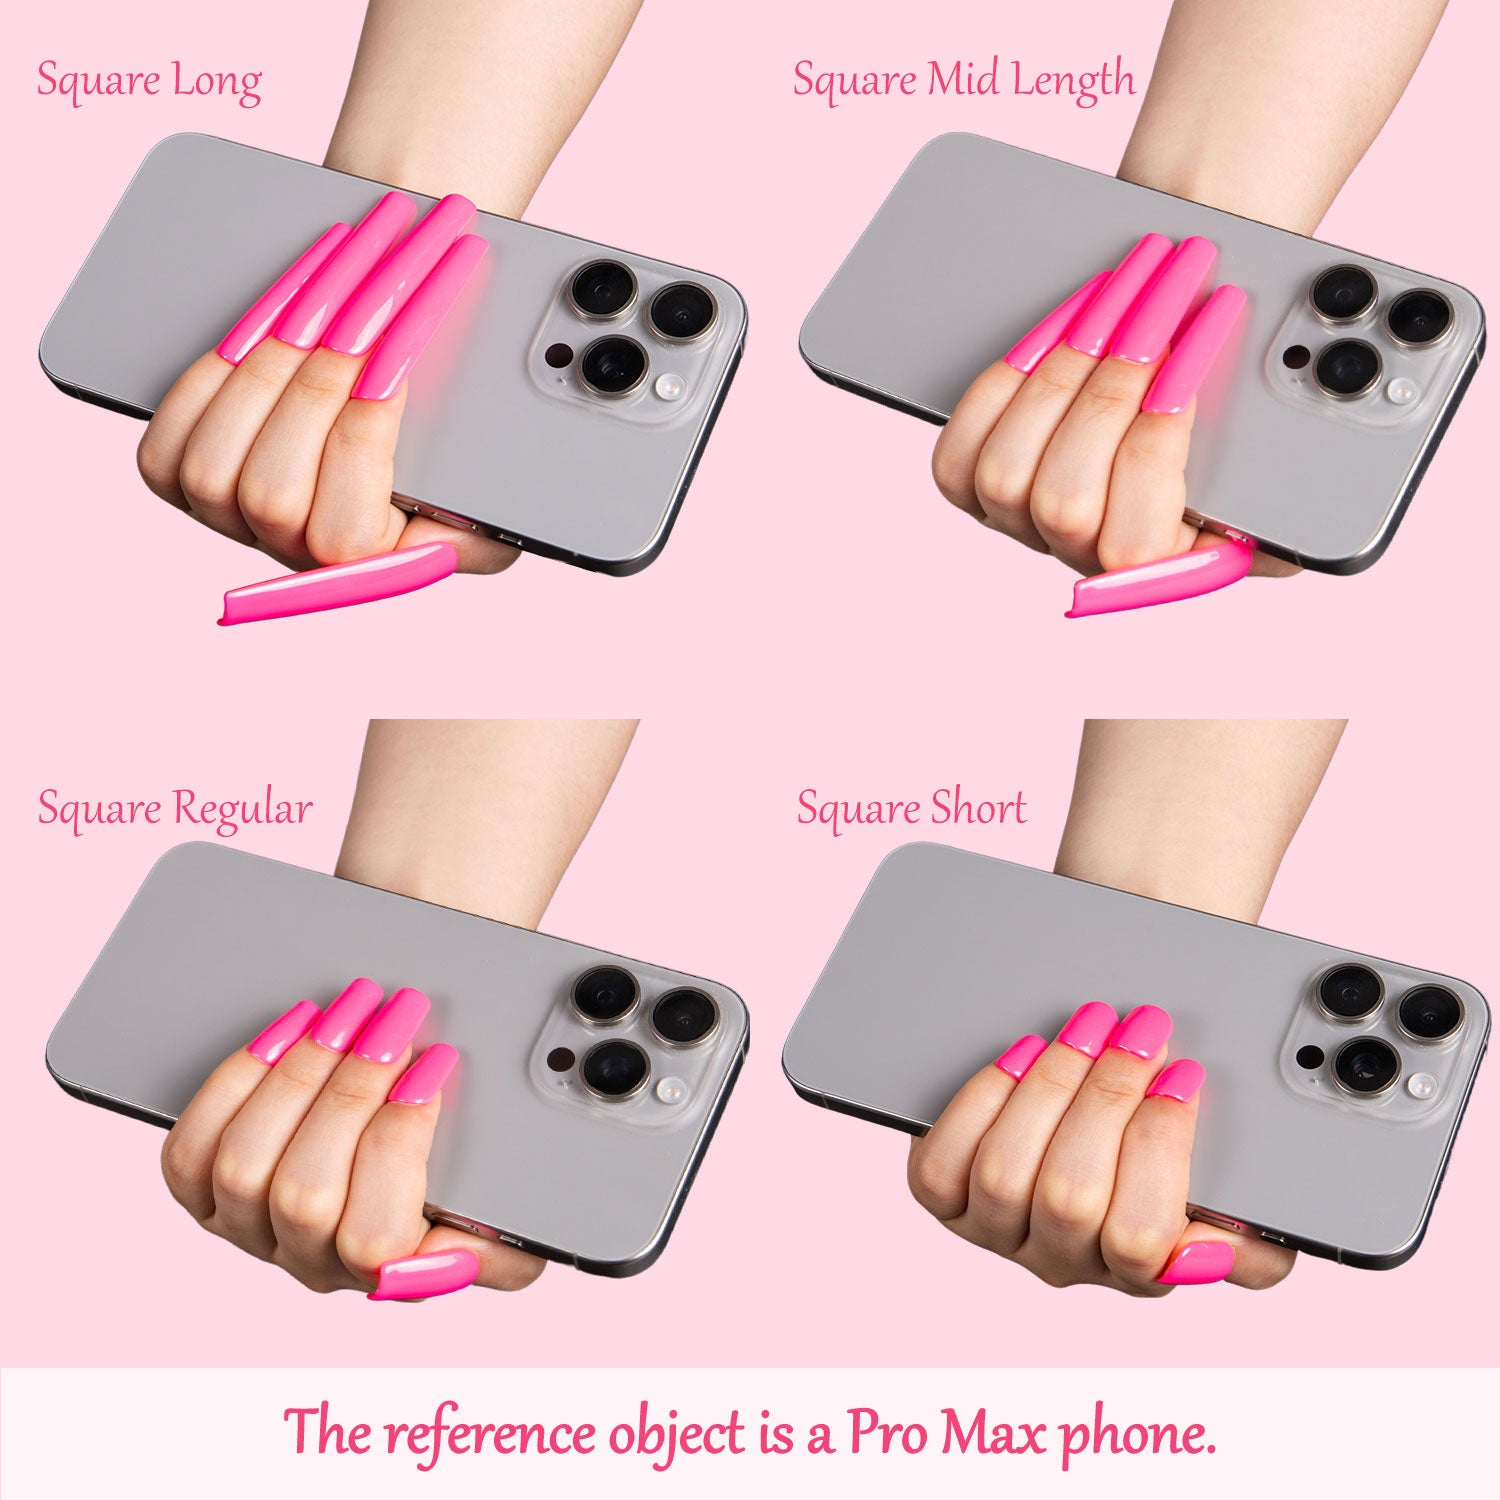 Comparison of four lengths of pink square press-on nails, labeled Square Long, Square Mid Length, Square Regular, and Square Short, with a reference Pro Max phone for size.